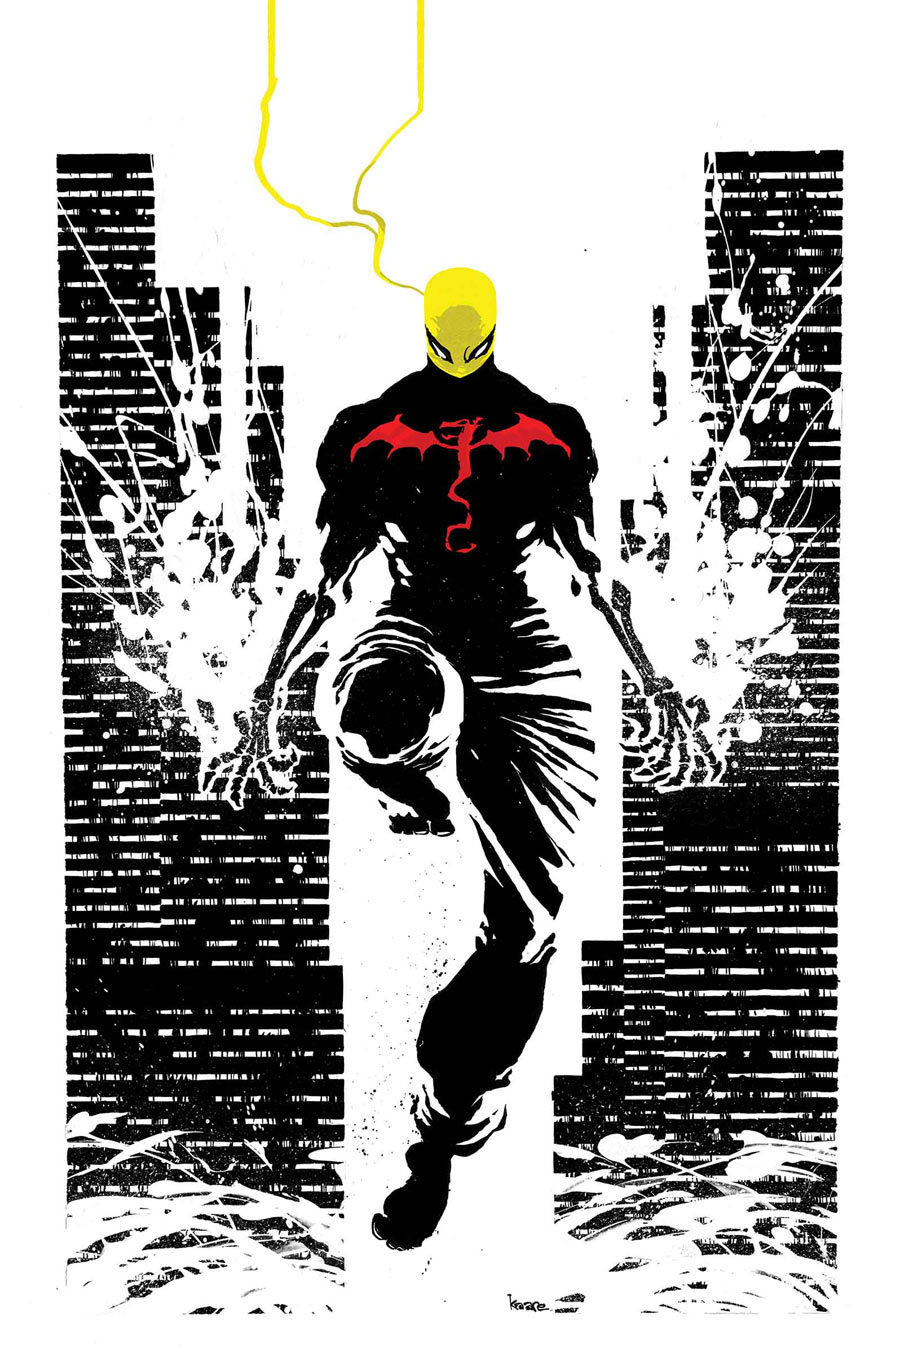 Iron Fist: The Living Weapon, featuring the latest solo adventures of the titular